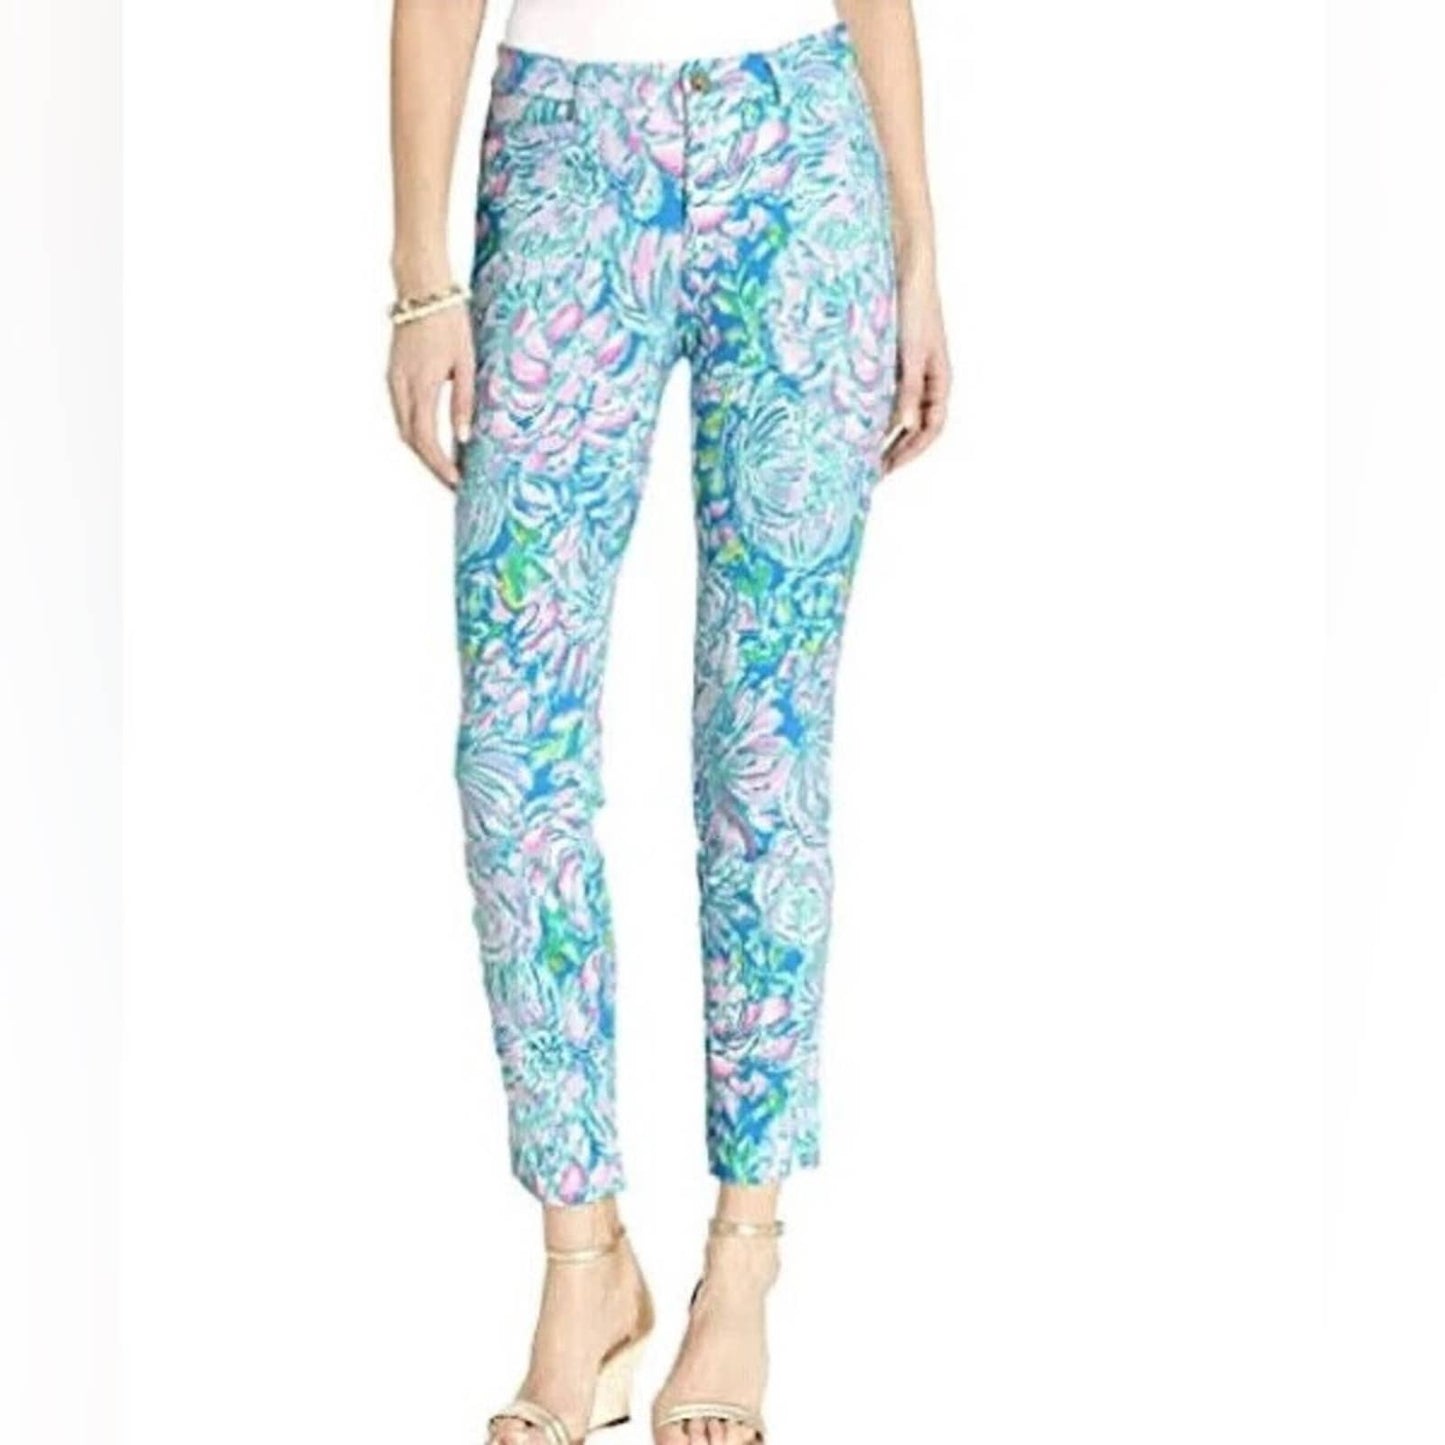 KELLY HIGH RISE KNIT SKINNY ANKLE PANT
MULTIcolor IN FULL BLOOM • SIZE: 12